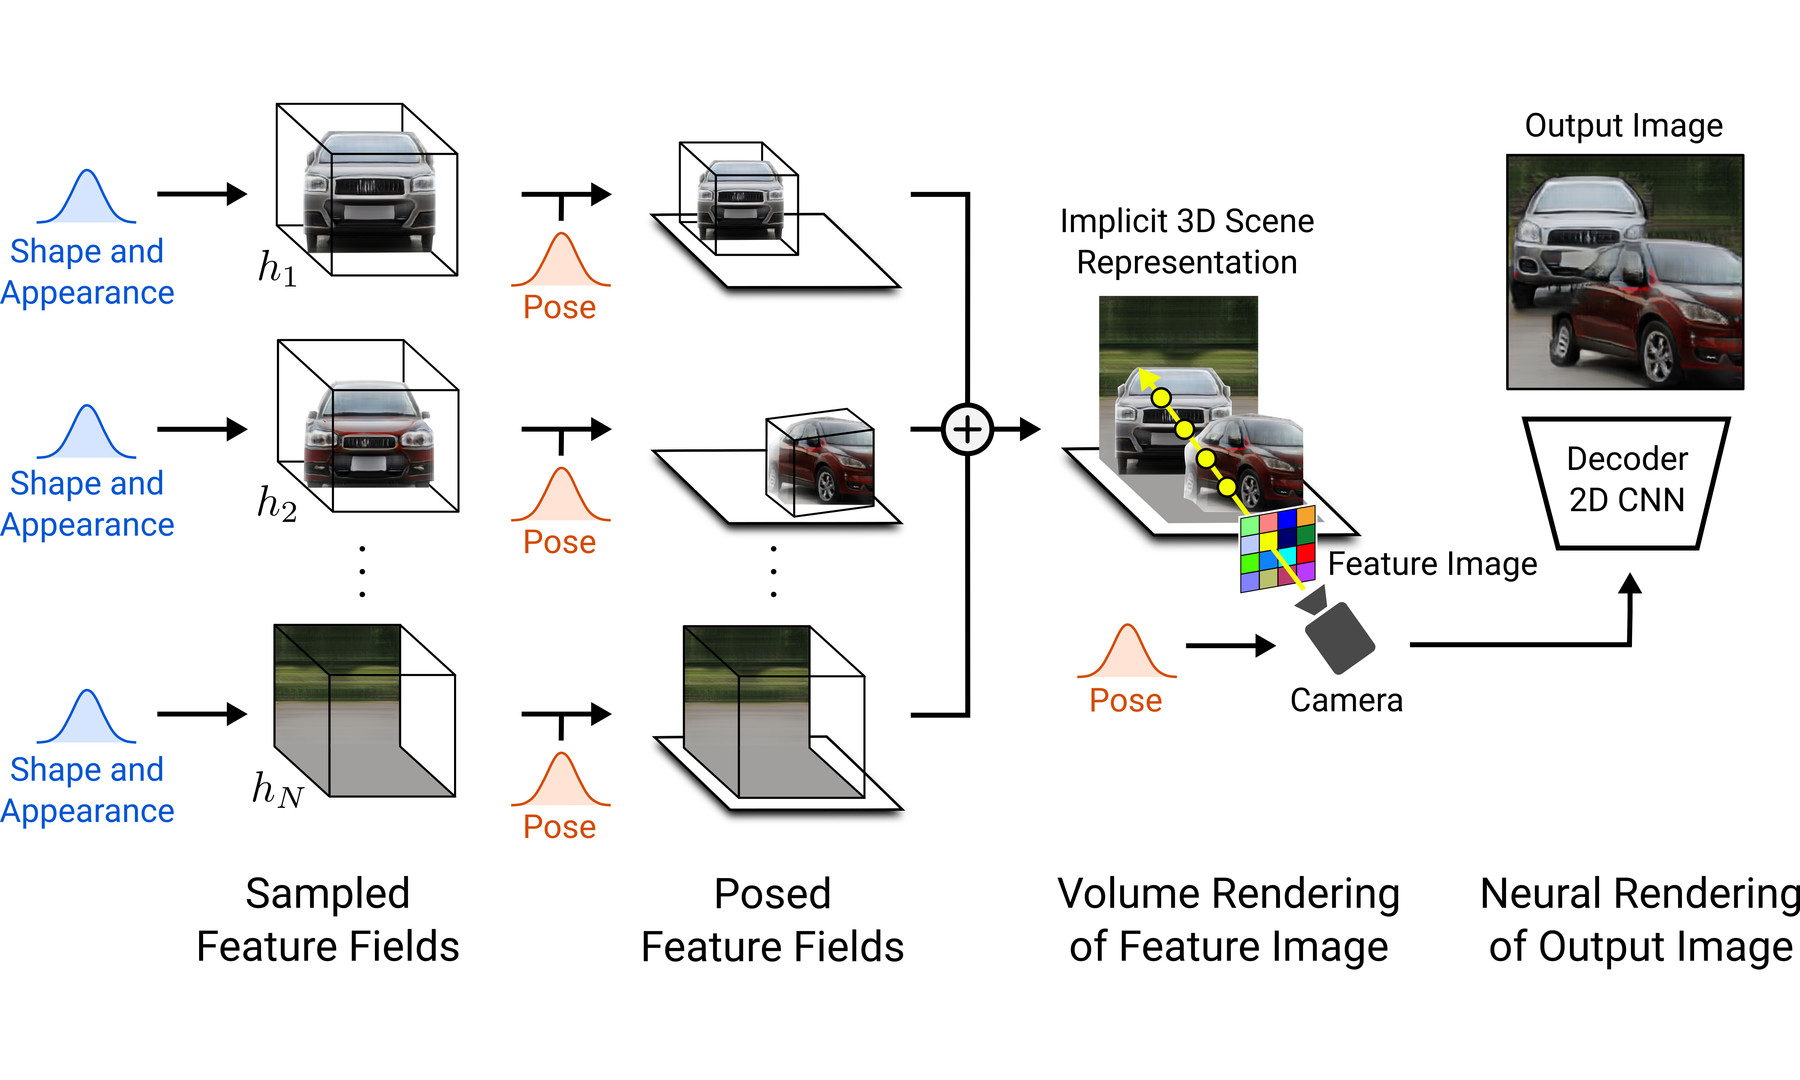 Graphics showing the steps of the GIRAFFE model: Sampled Feature Fields, Posed Feature Fields, Volume Rendering of Feature Image and Neural Rendering of Output Image